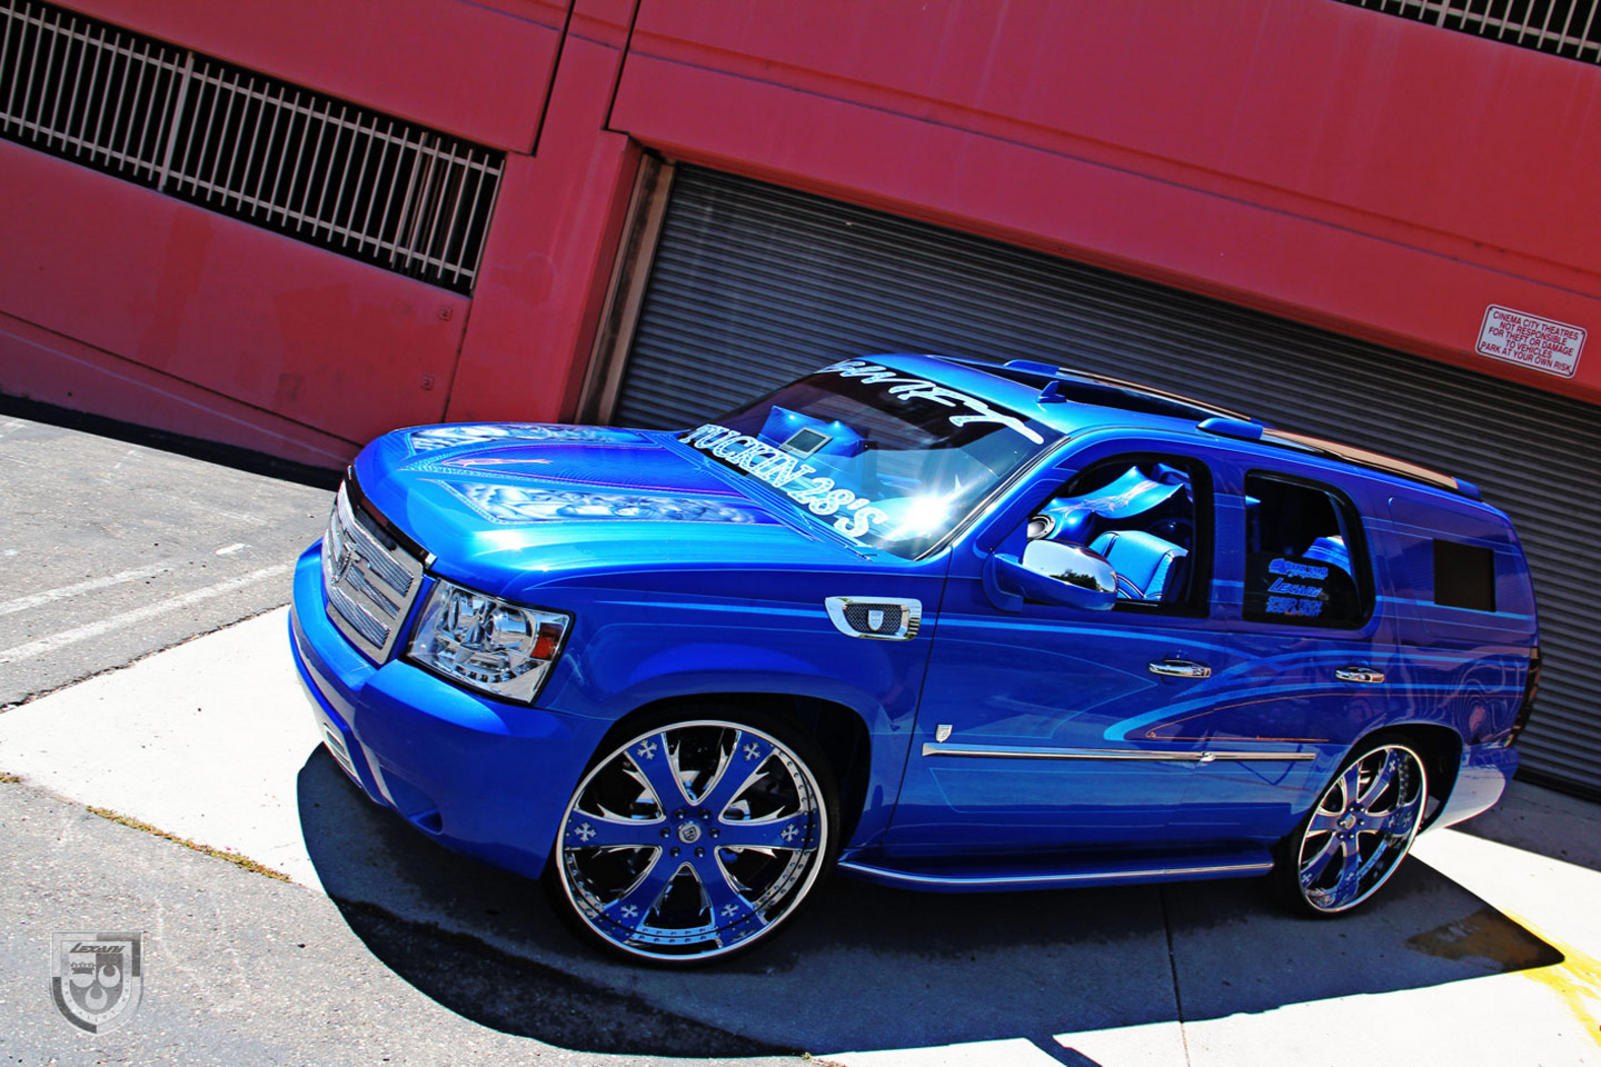 Lowered Chevy Tahoe on Chrome and Blue LT-Series Wheels - Photo by Lexani.